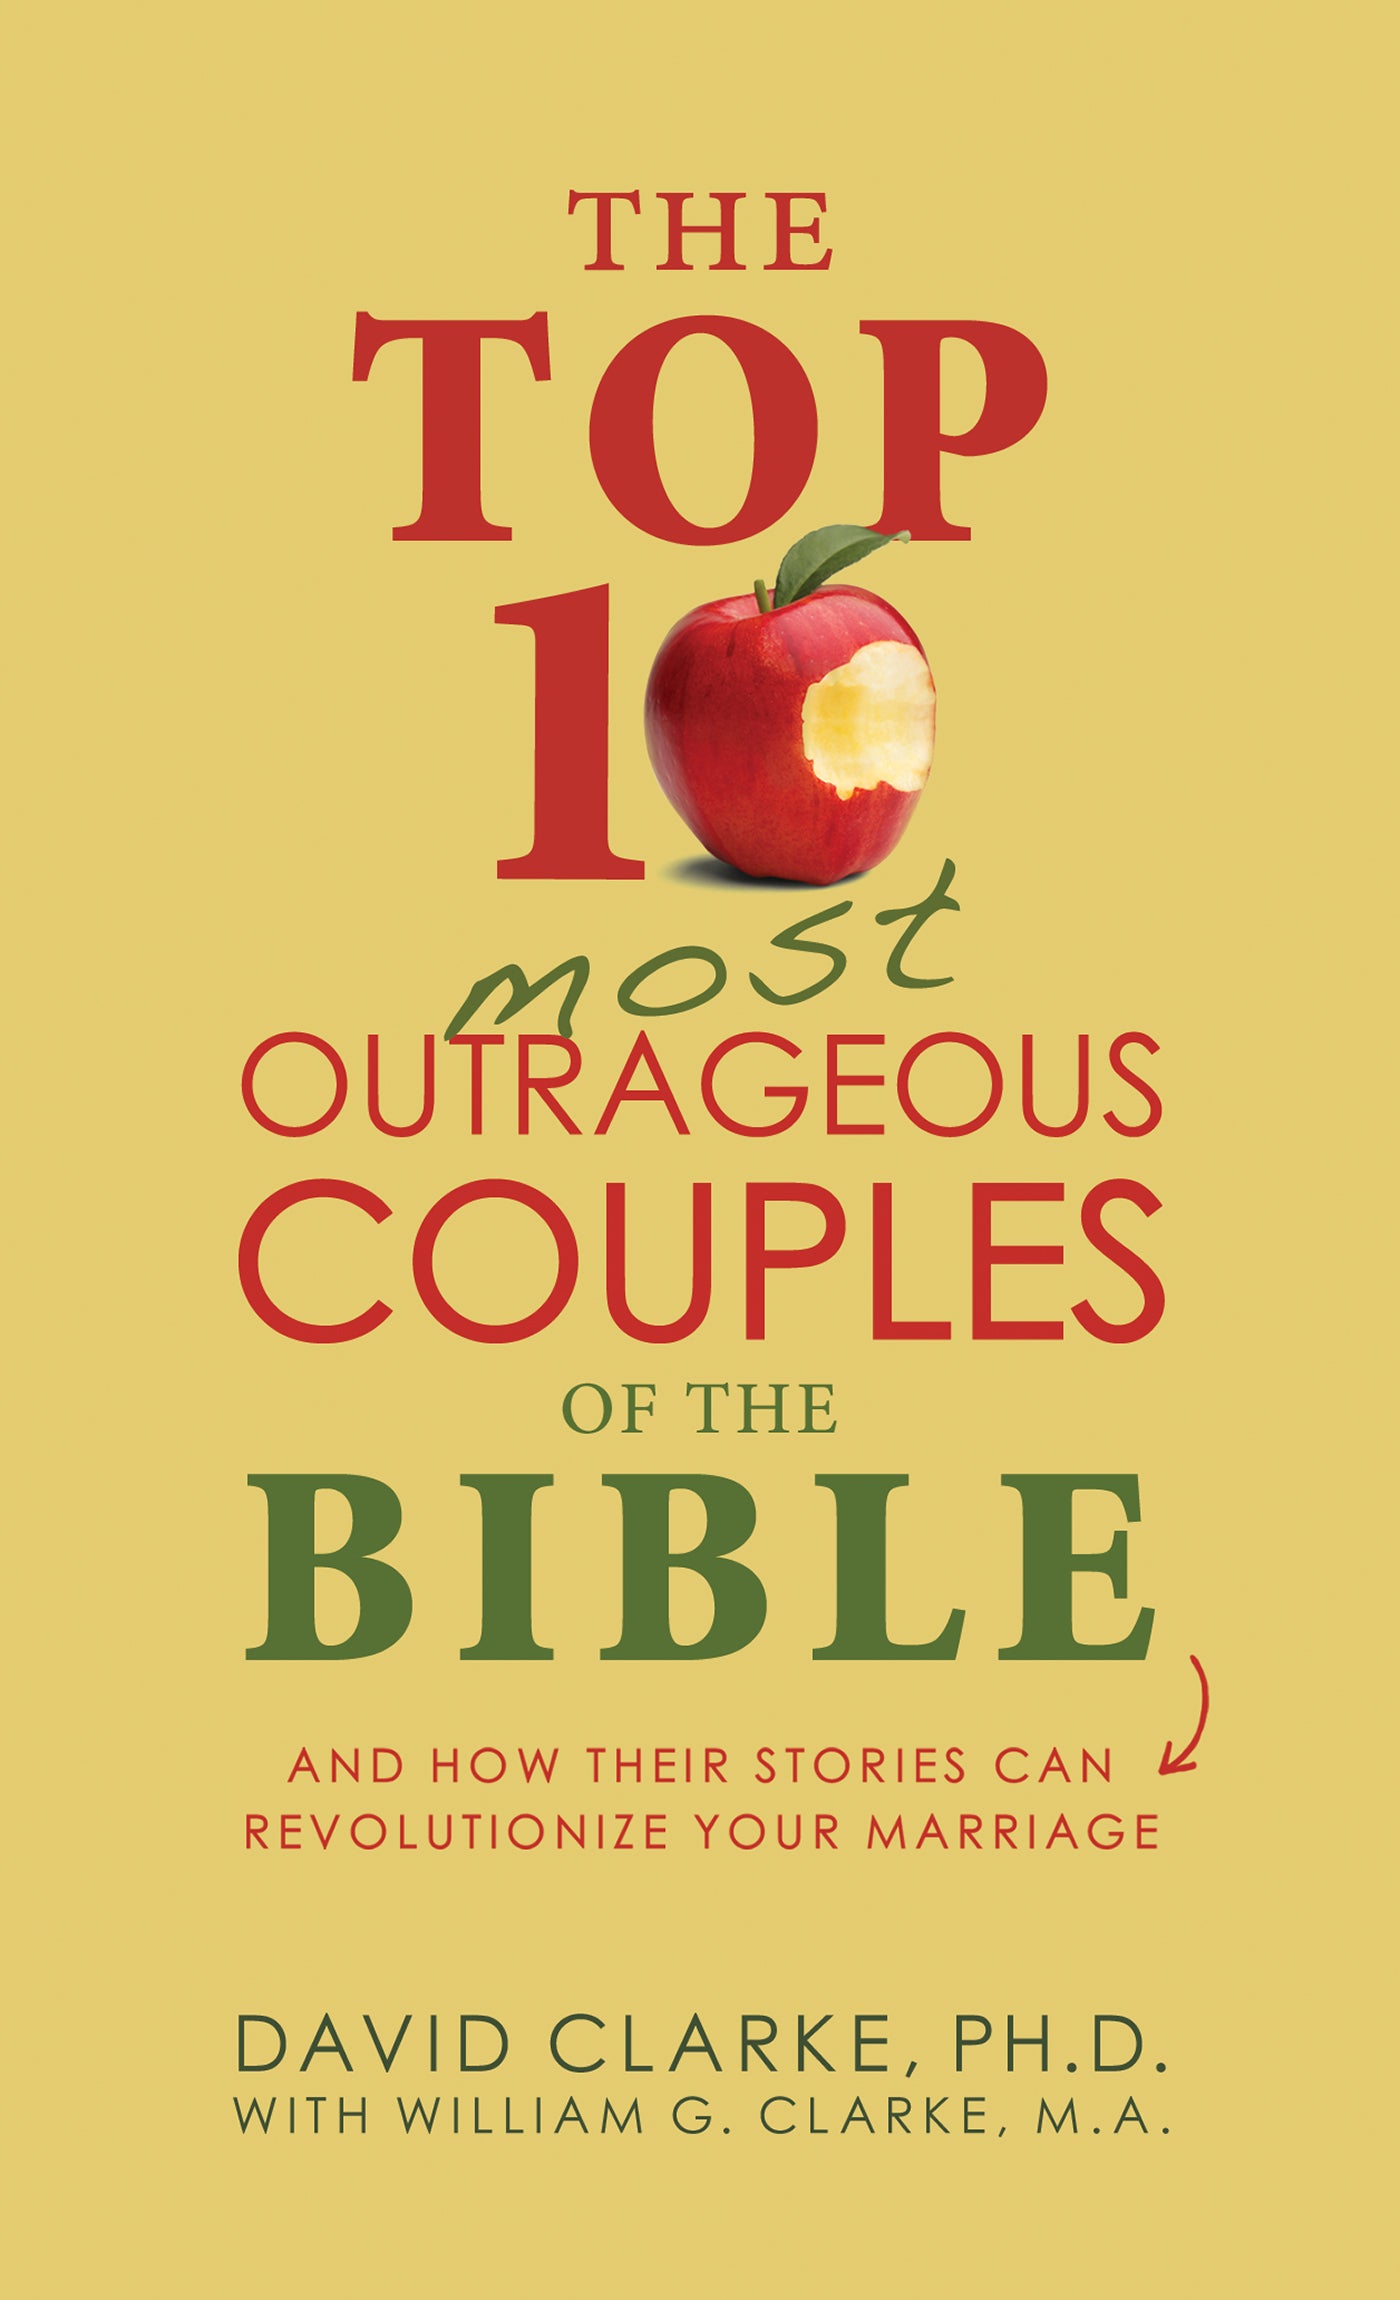 The Top 10 Most Outrageous Couples of the Bible - The Christian Gift Company